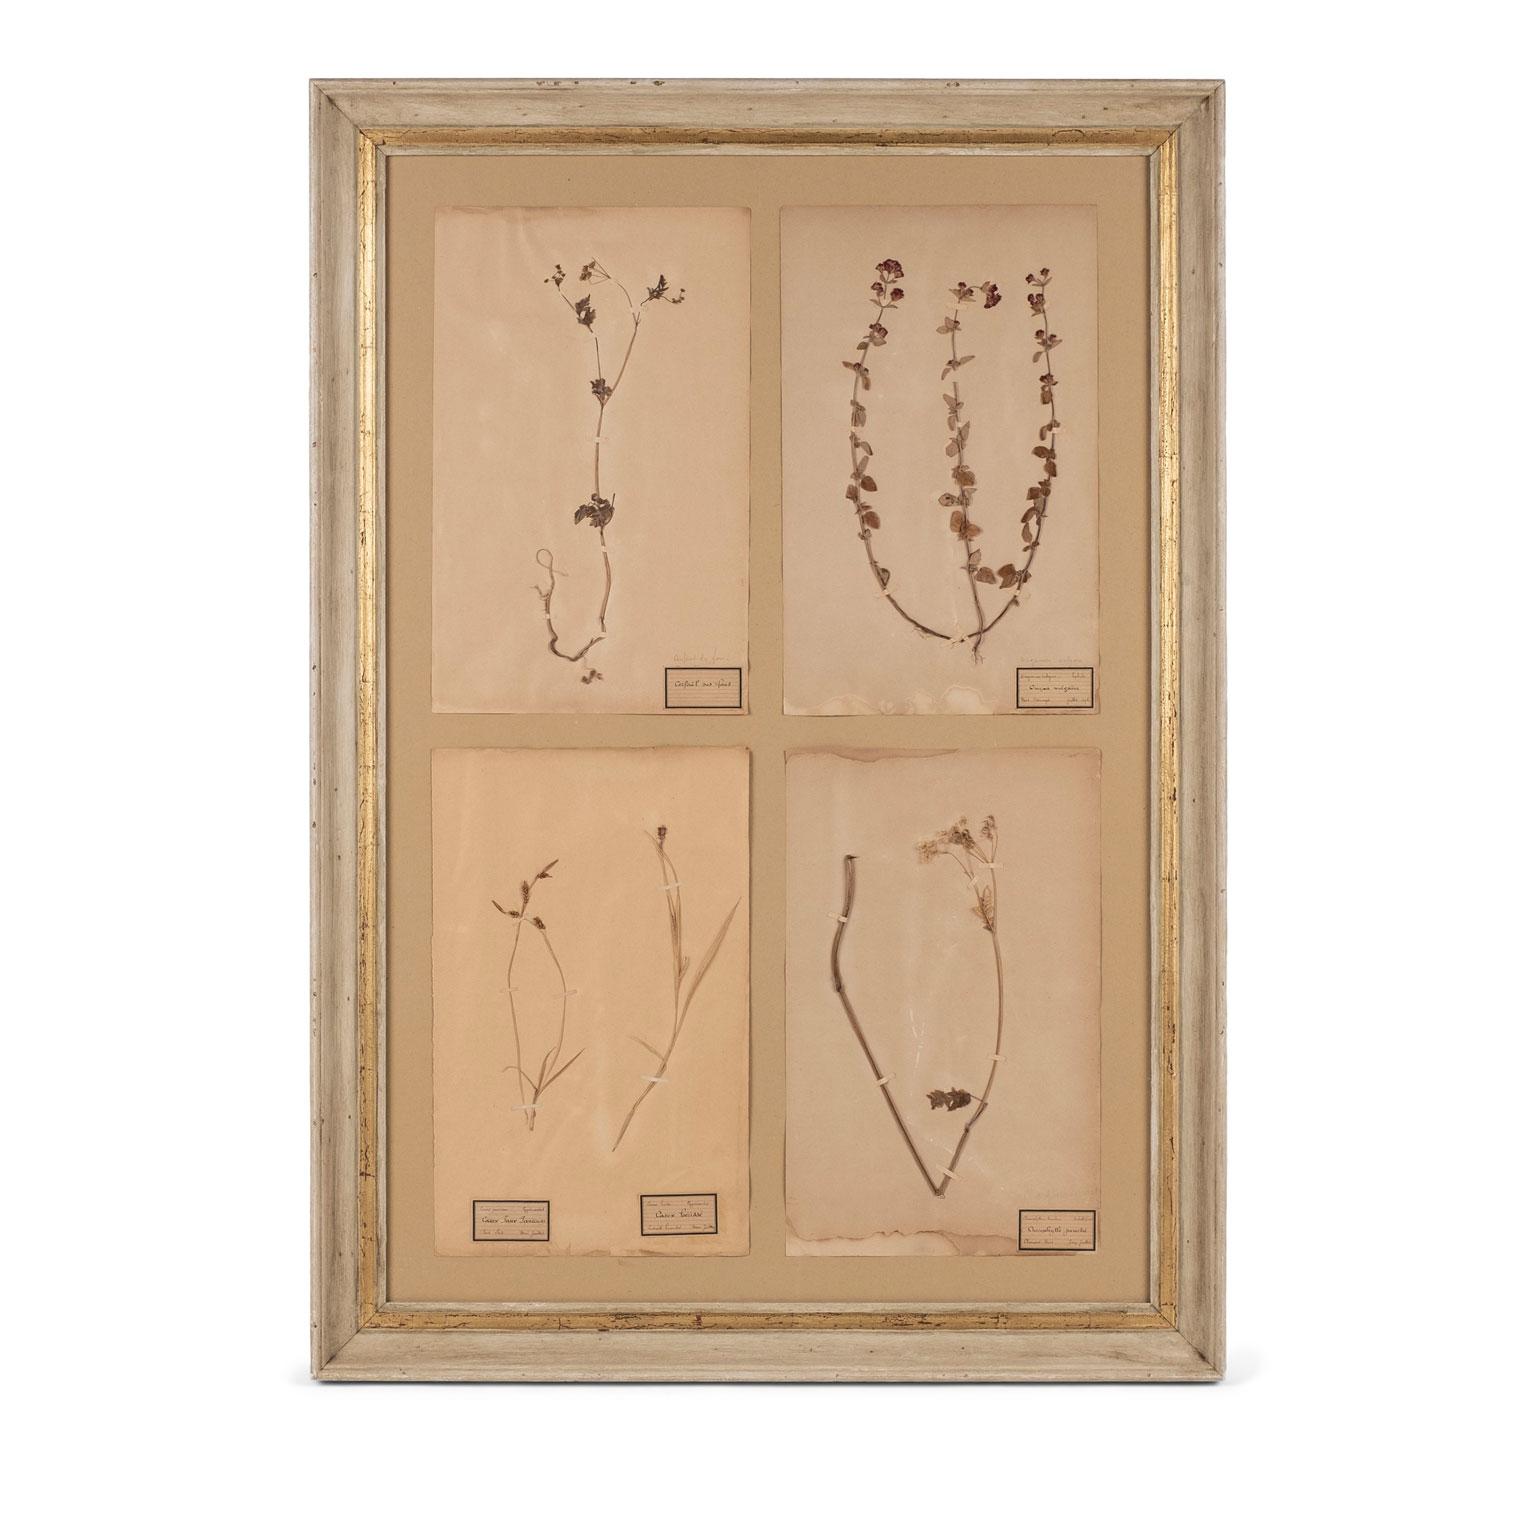 Pair of framed herbaria from the 19th century. Each herbarium unframed measures: 17.5 inches high x 11 inches wide. Each framed collection sold separately and priced $2,200 each.